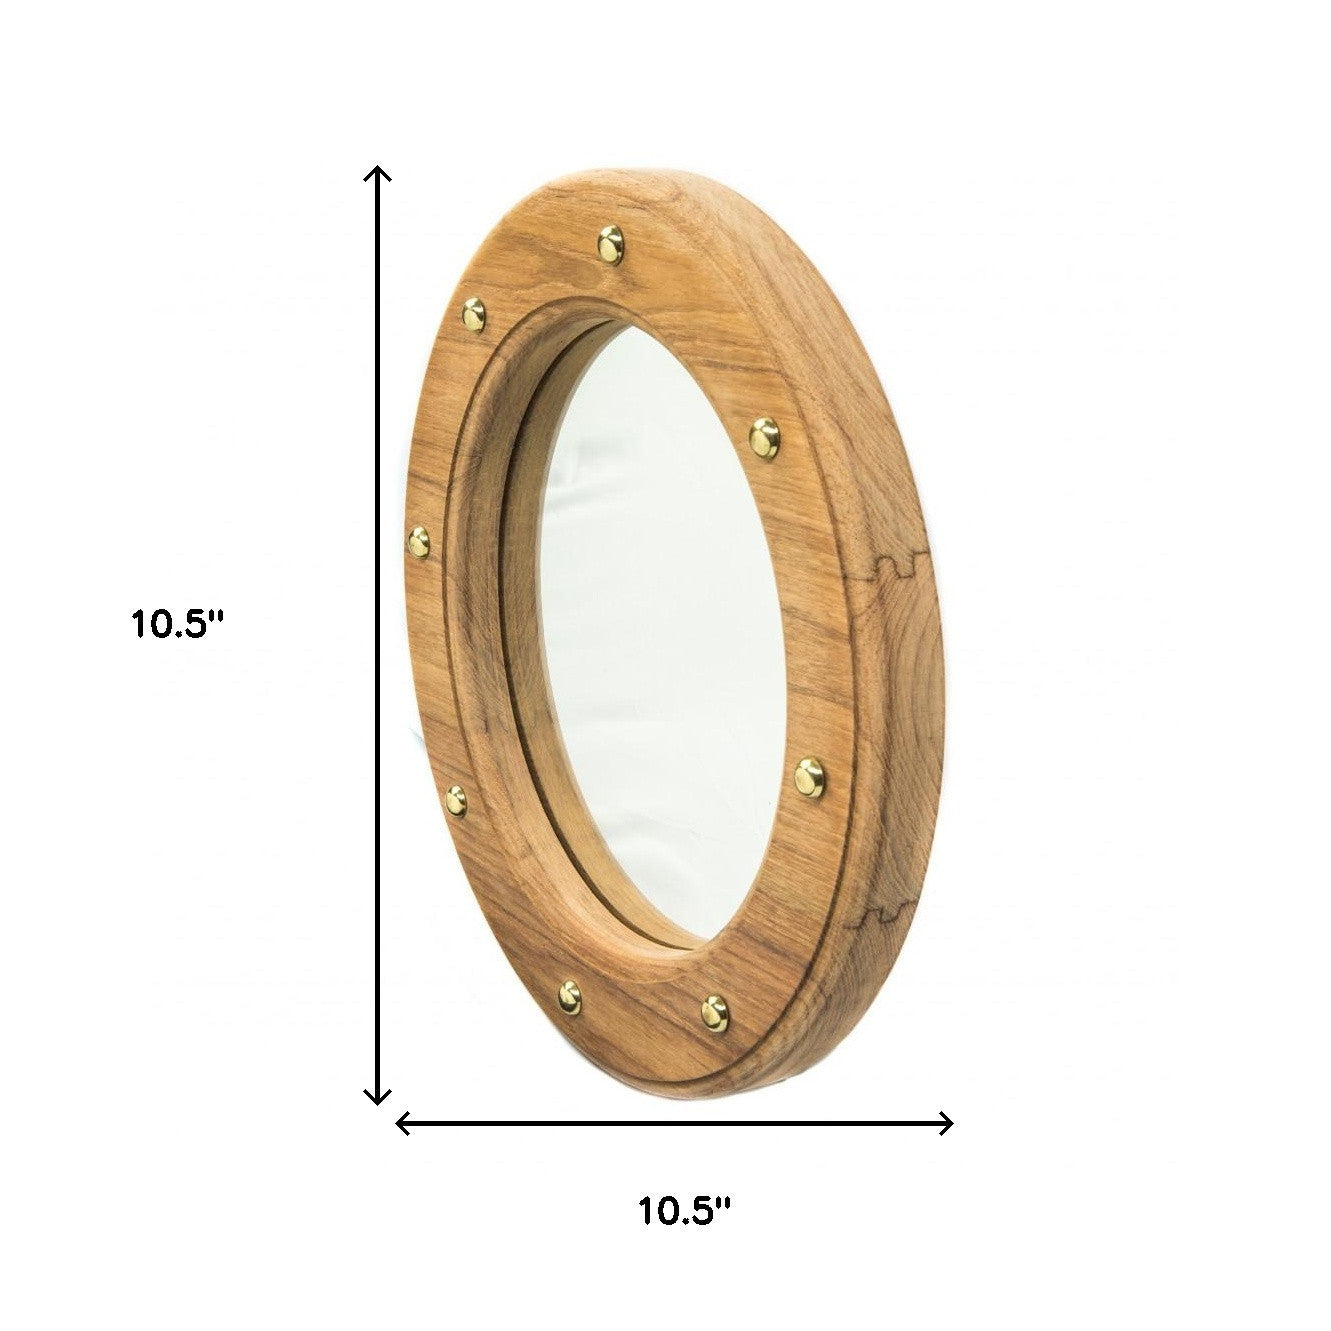 11" Round Wall Mounted Teak Wood Mirror with Nautical Rivets